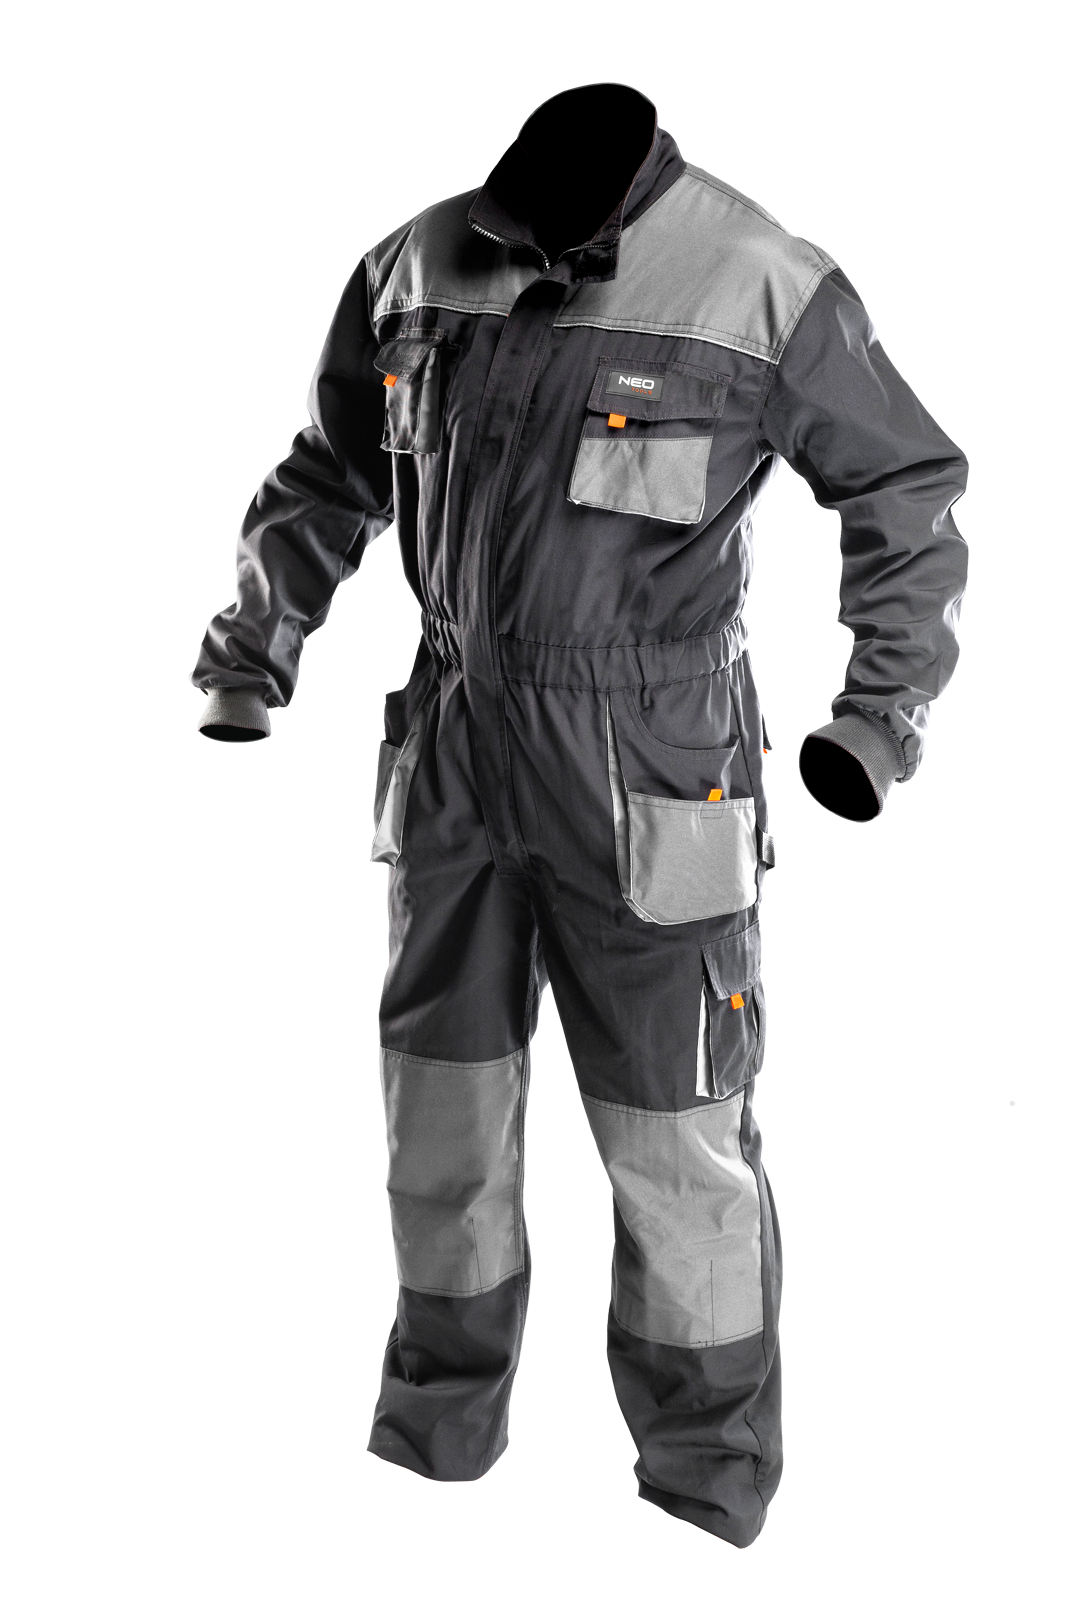 NEO TOOLS WORKING OVERALLS XL(56)